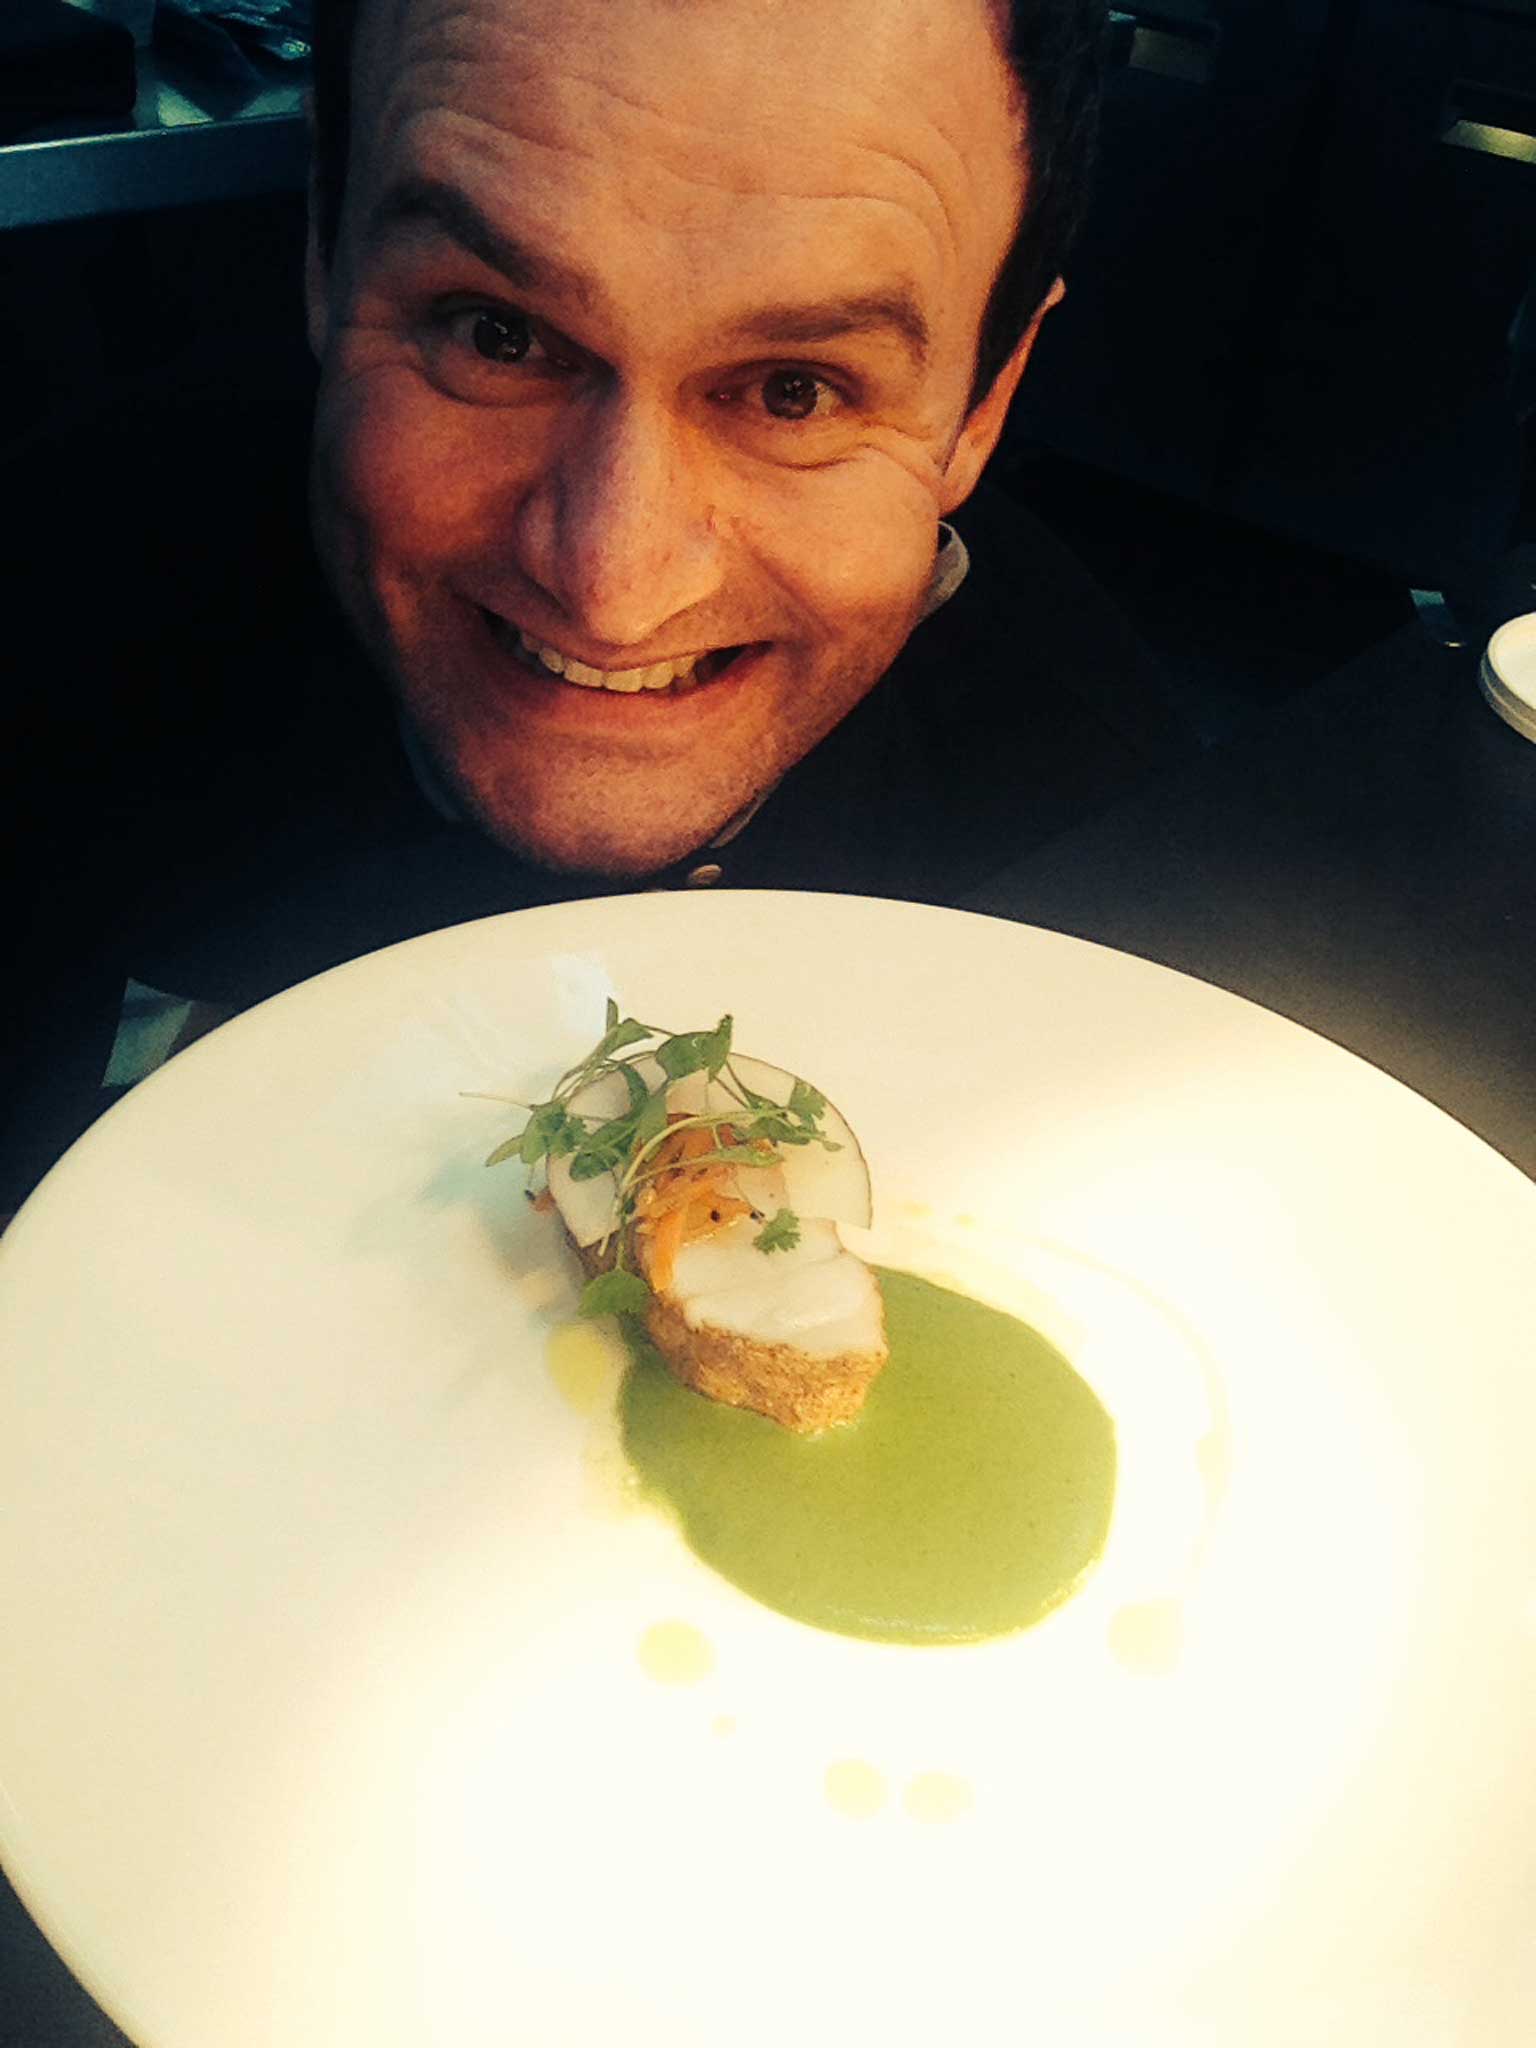 Chef Glynn Purnell with his Masala spiced-monkfish